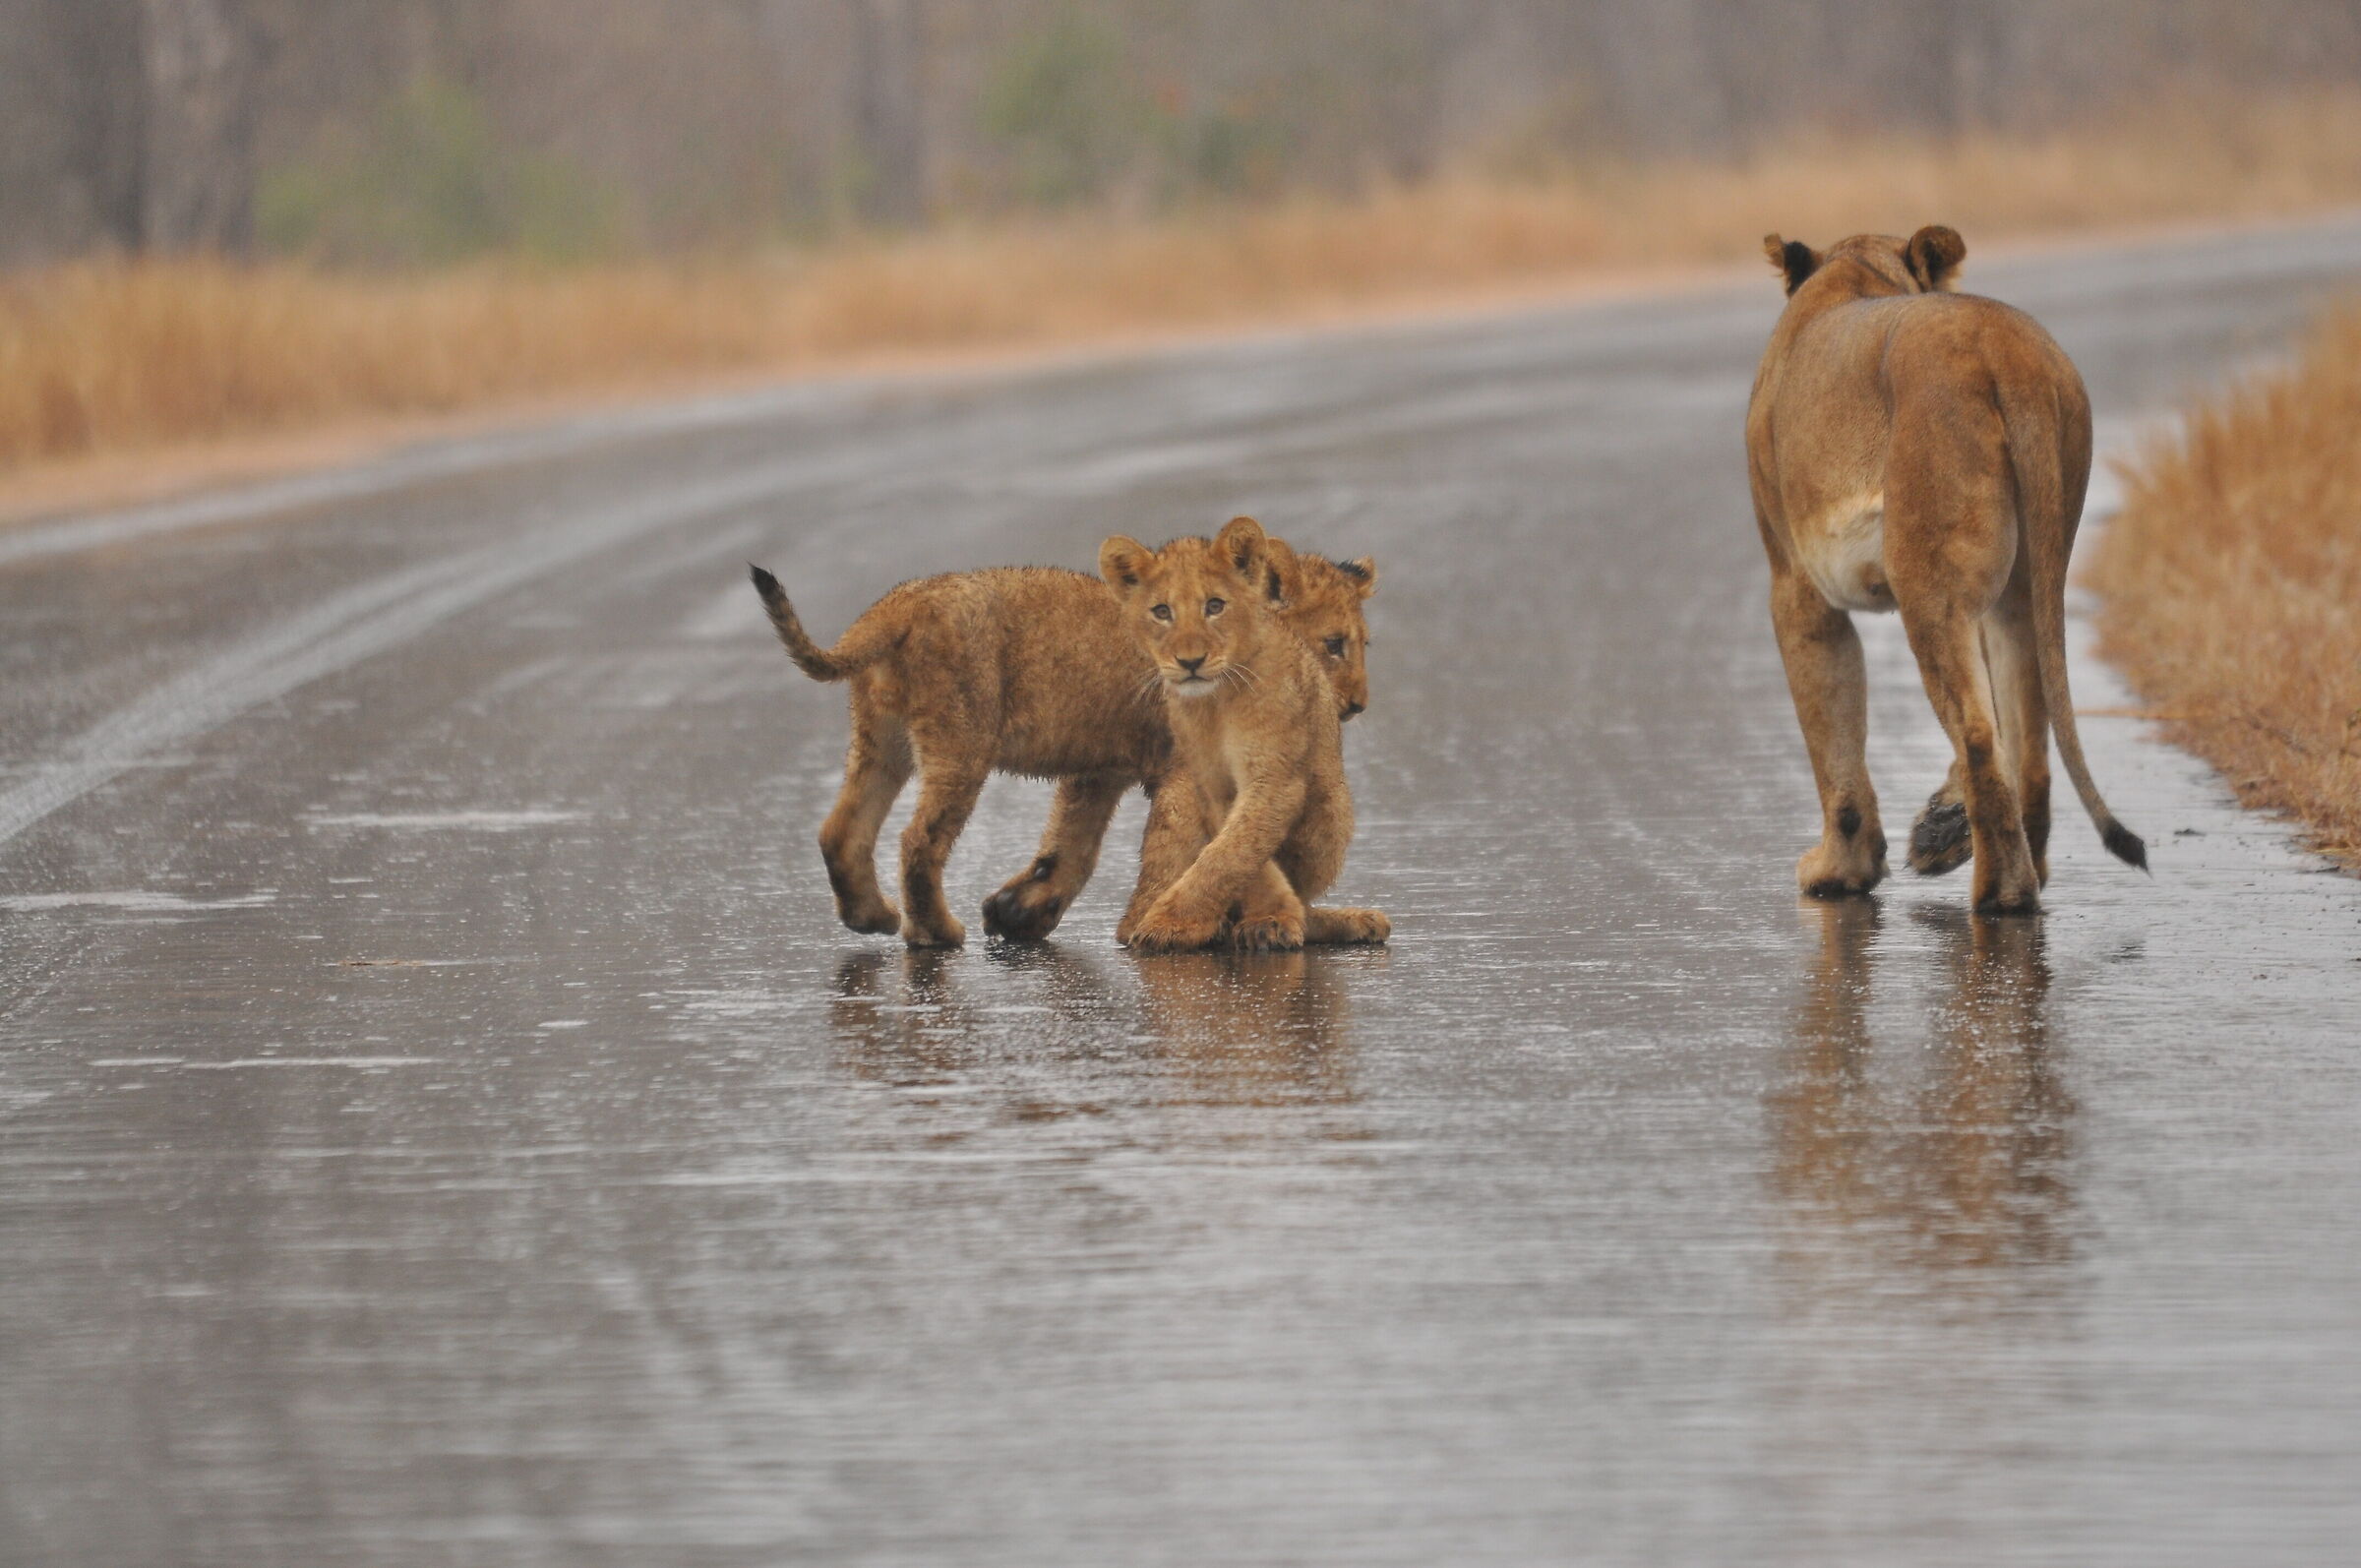 Lions on the road...